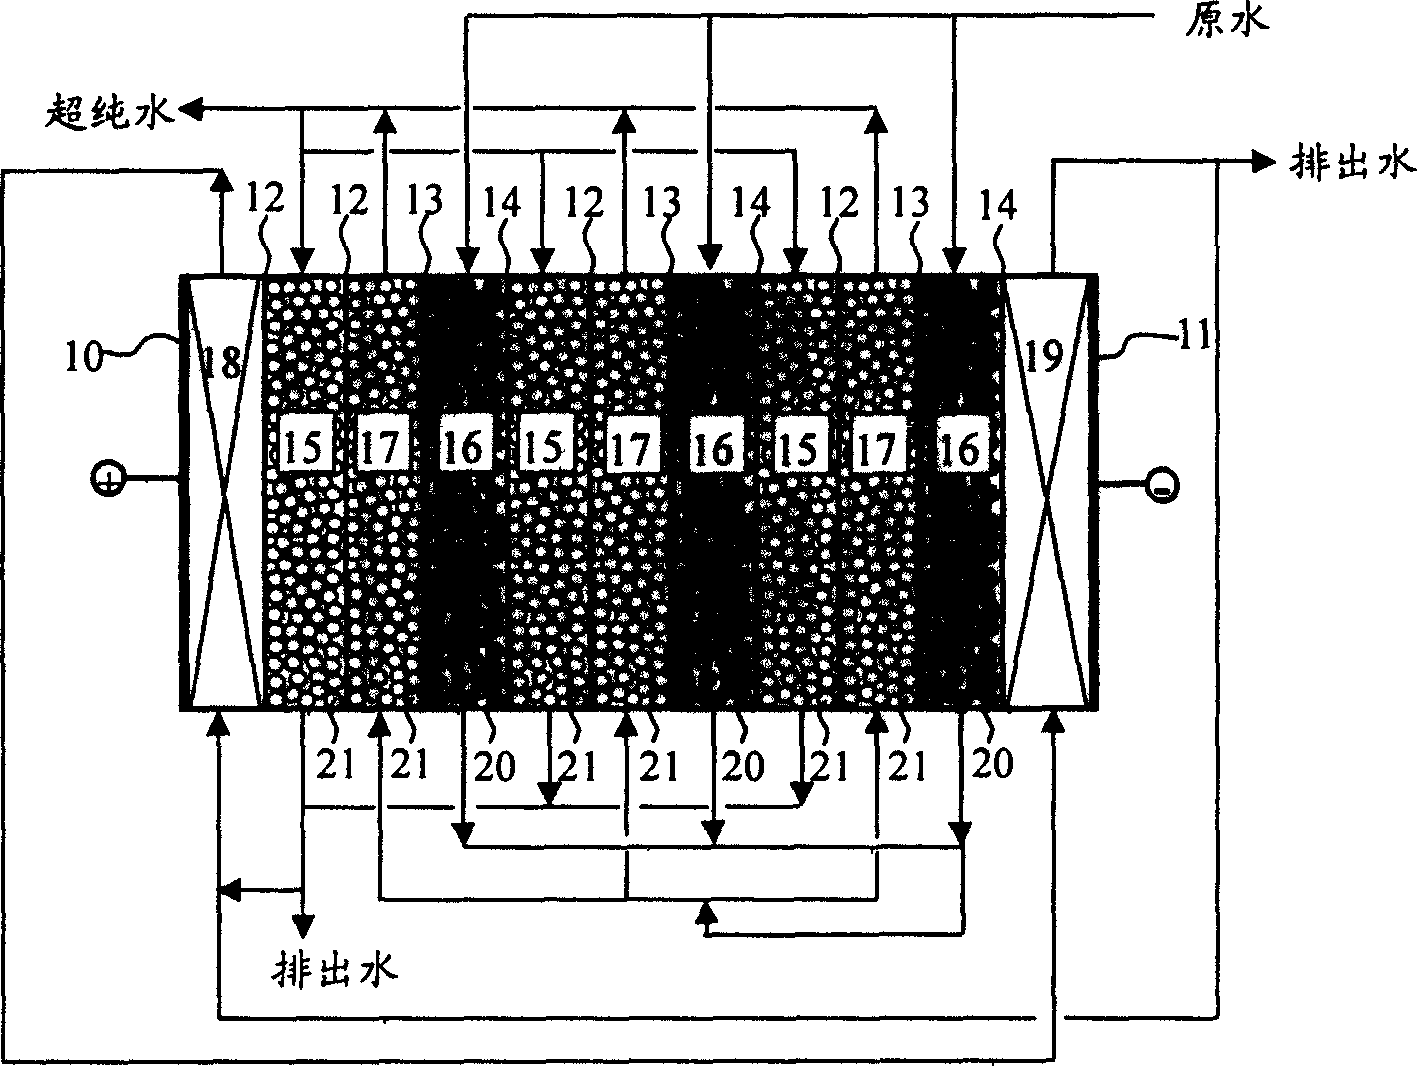 Electric deionisation method and apparatus for producing superpure water using bipolar membrane